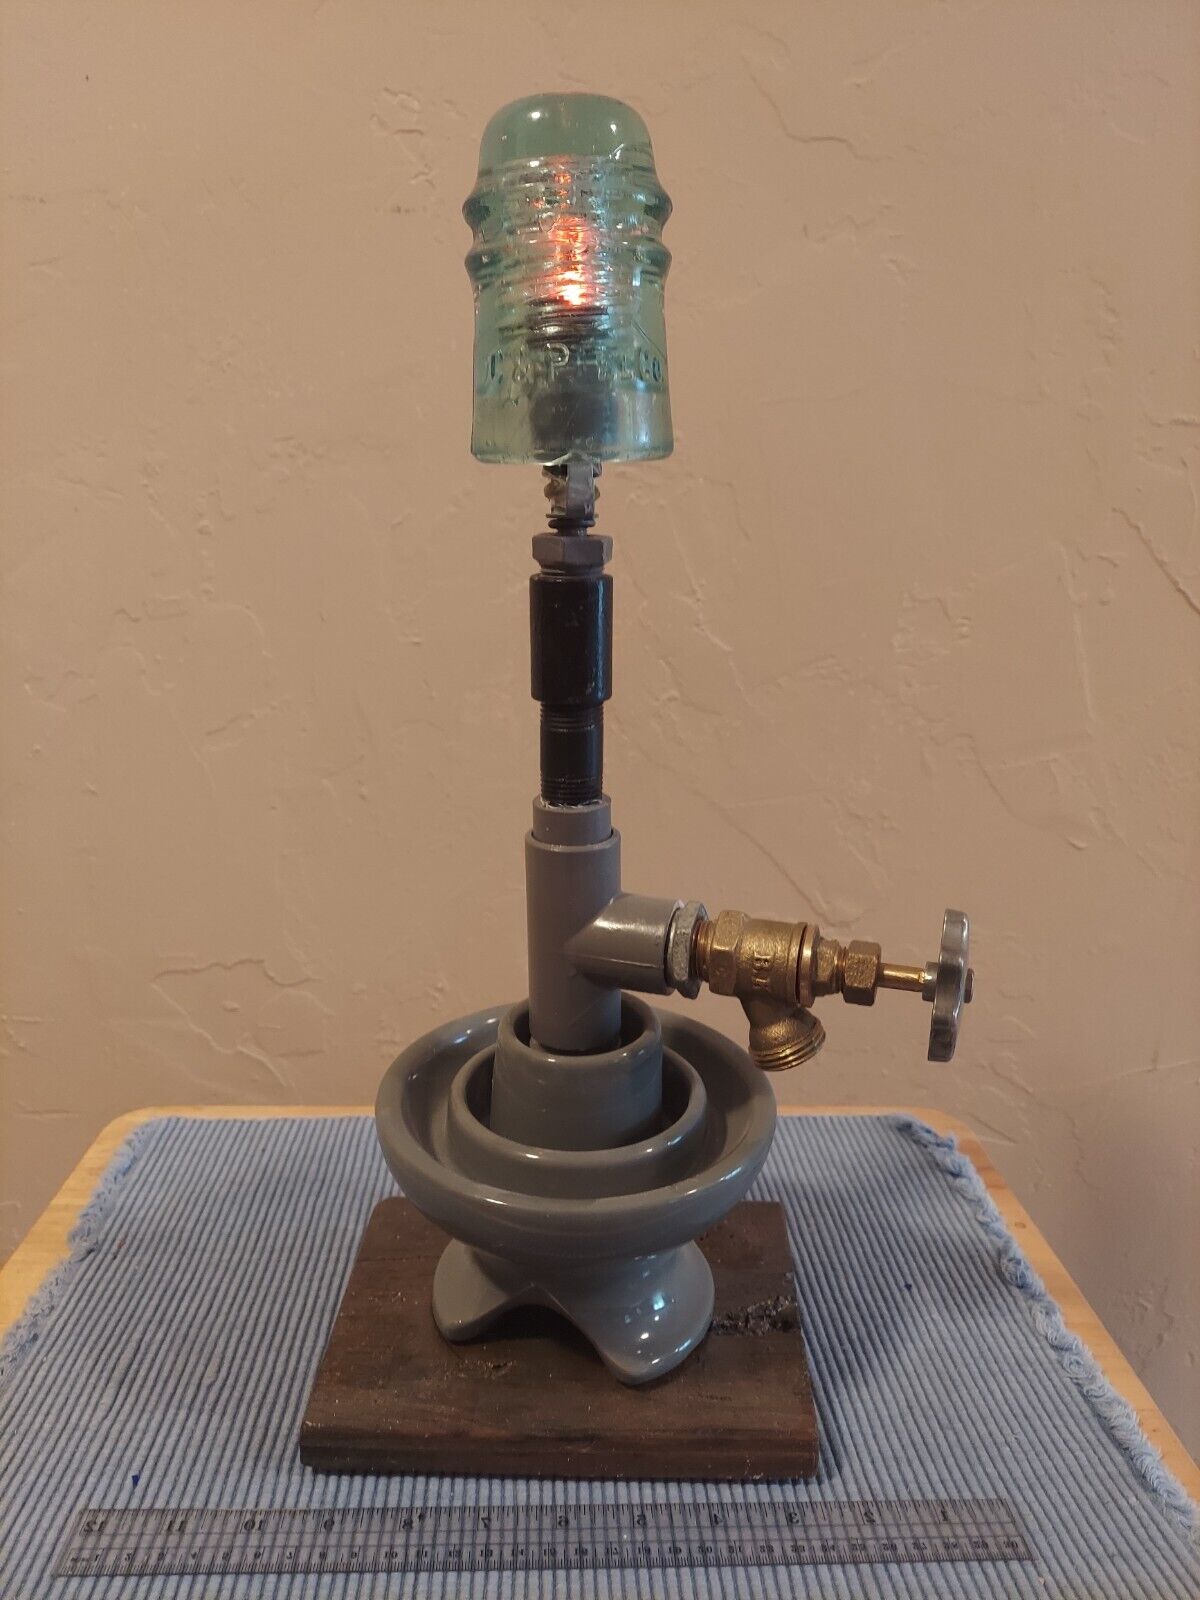 Vintage Black Iron Steampunk Table Lamp With Removable Insulator Shade. 